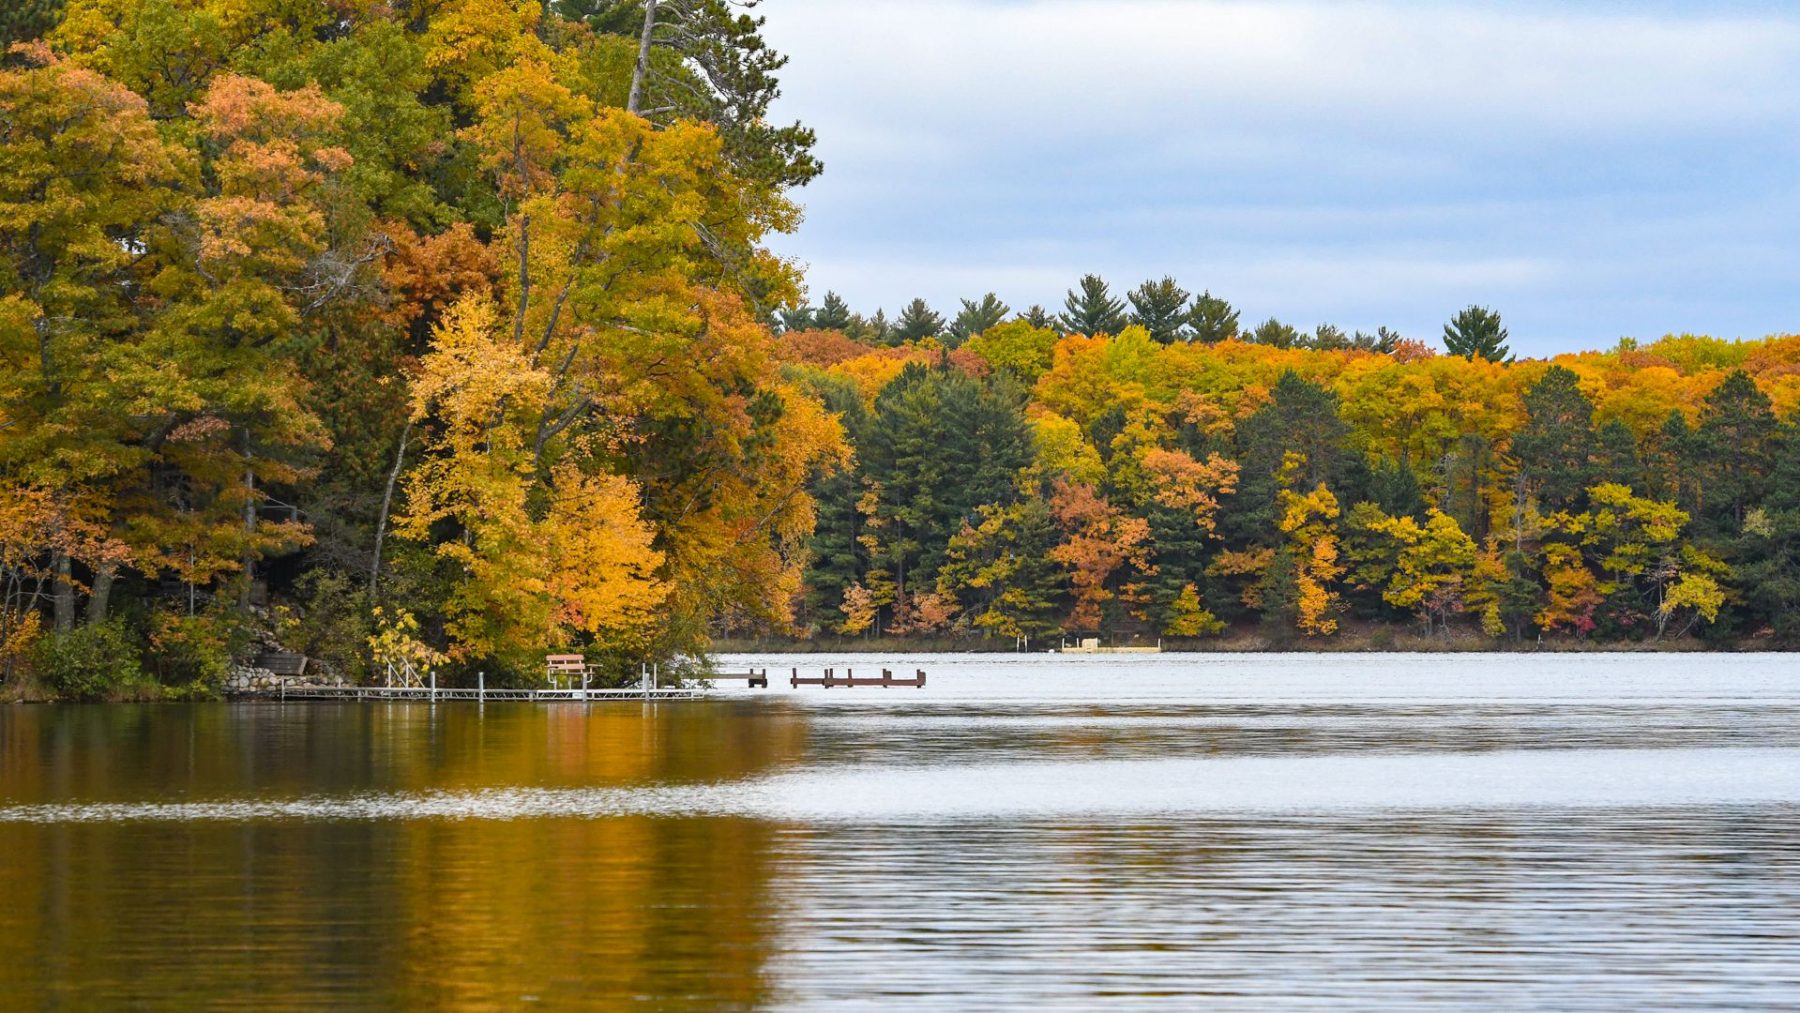 Article: Your guide to Minocqua